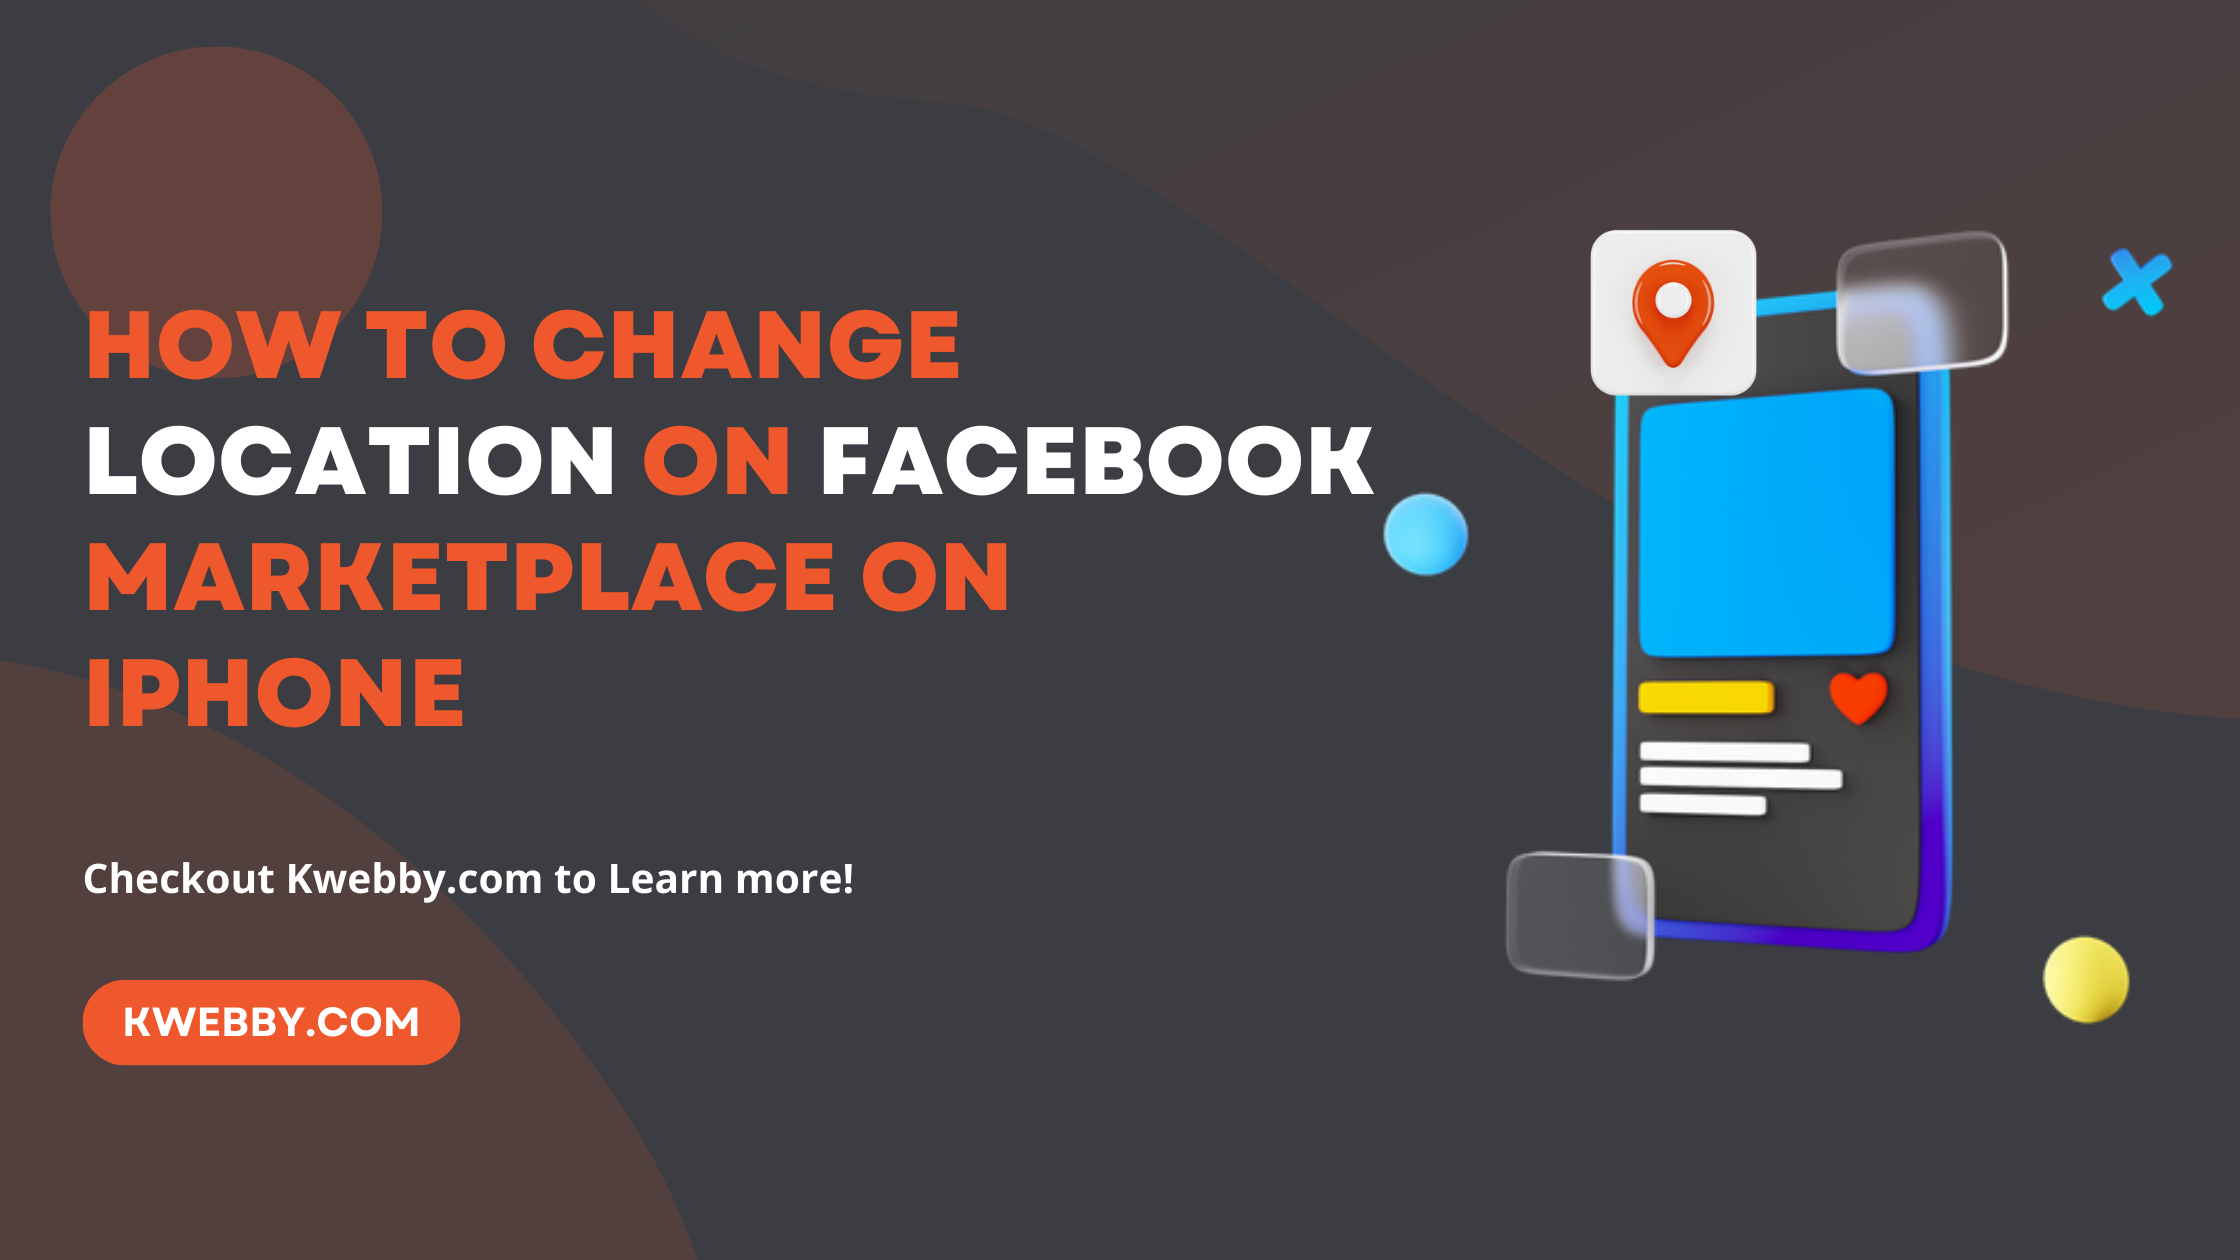 How to Change Location on Facebook Marketplace on iPhone